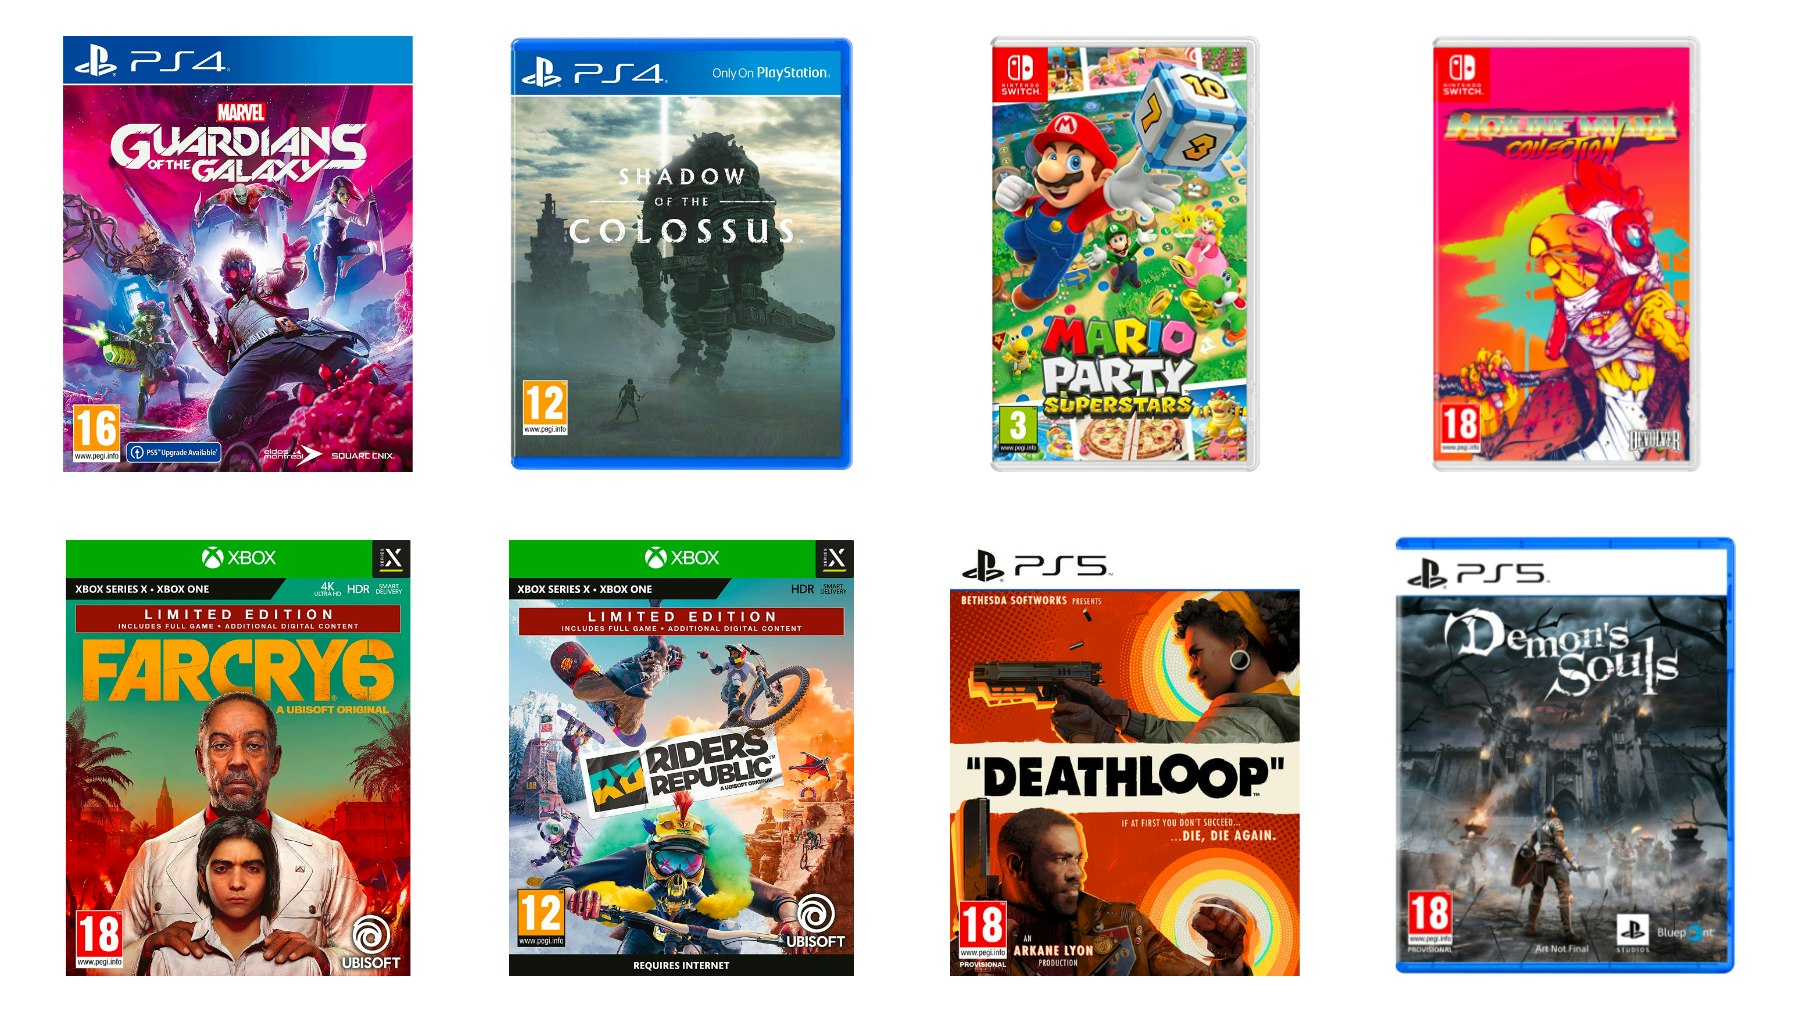 Black Friday 2022: Save up to 50% on the best Nintendo Switch games